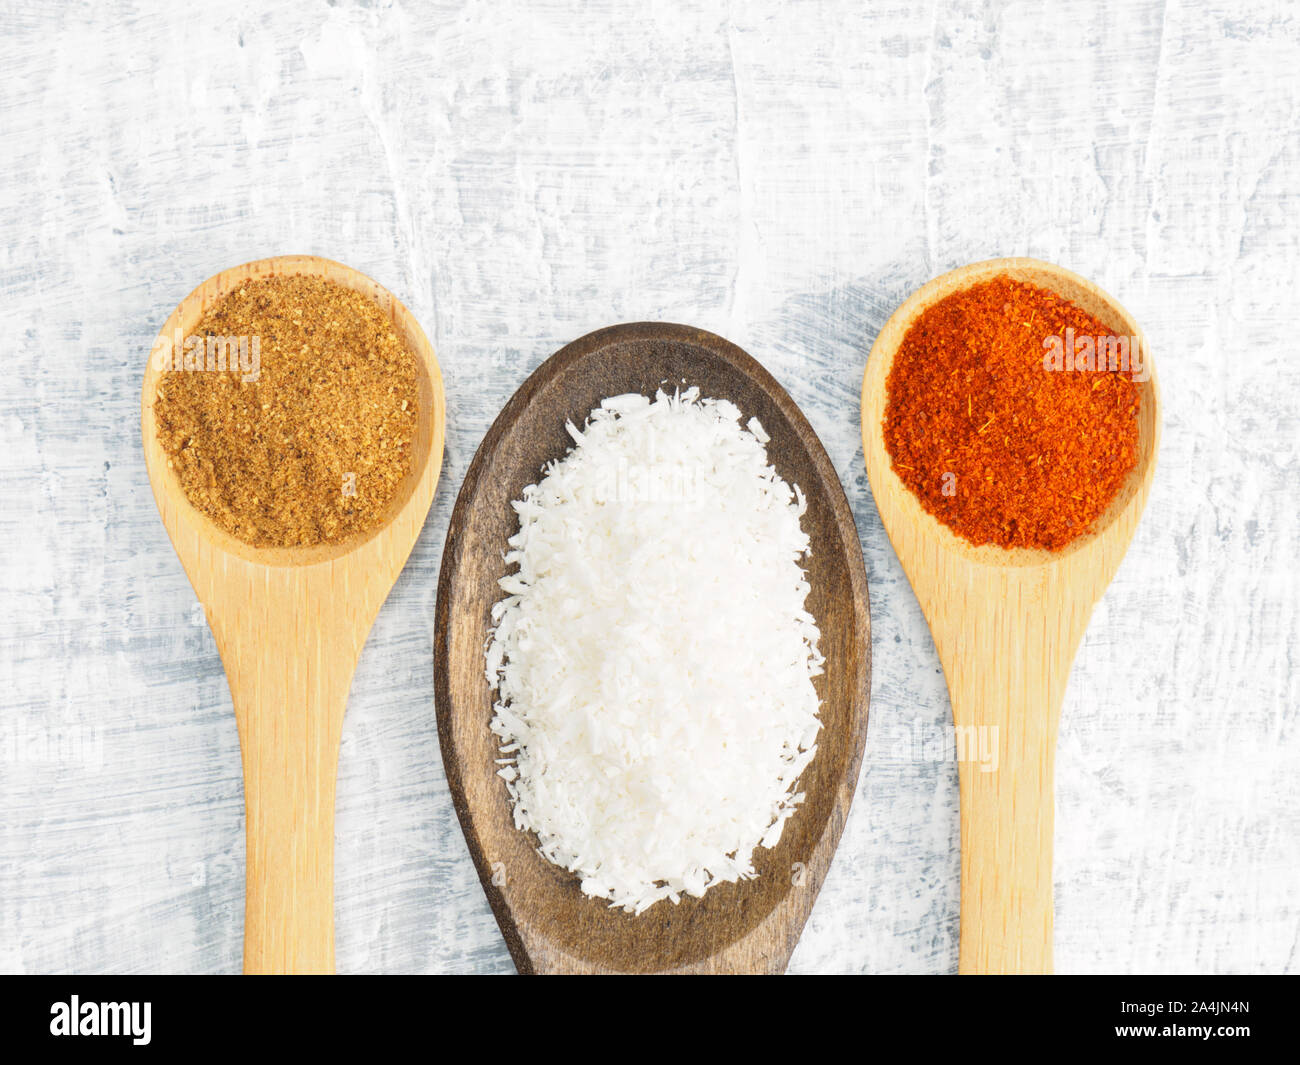 Spices and herbs set on concrete background in wooden spoon. Masala, mustard, chili pepper. Modern apothecary, naturopathy and ayurveda concept. Stock Photo